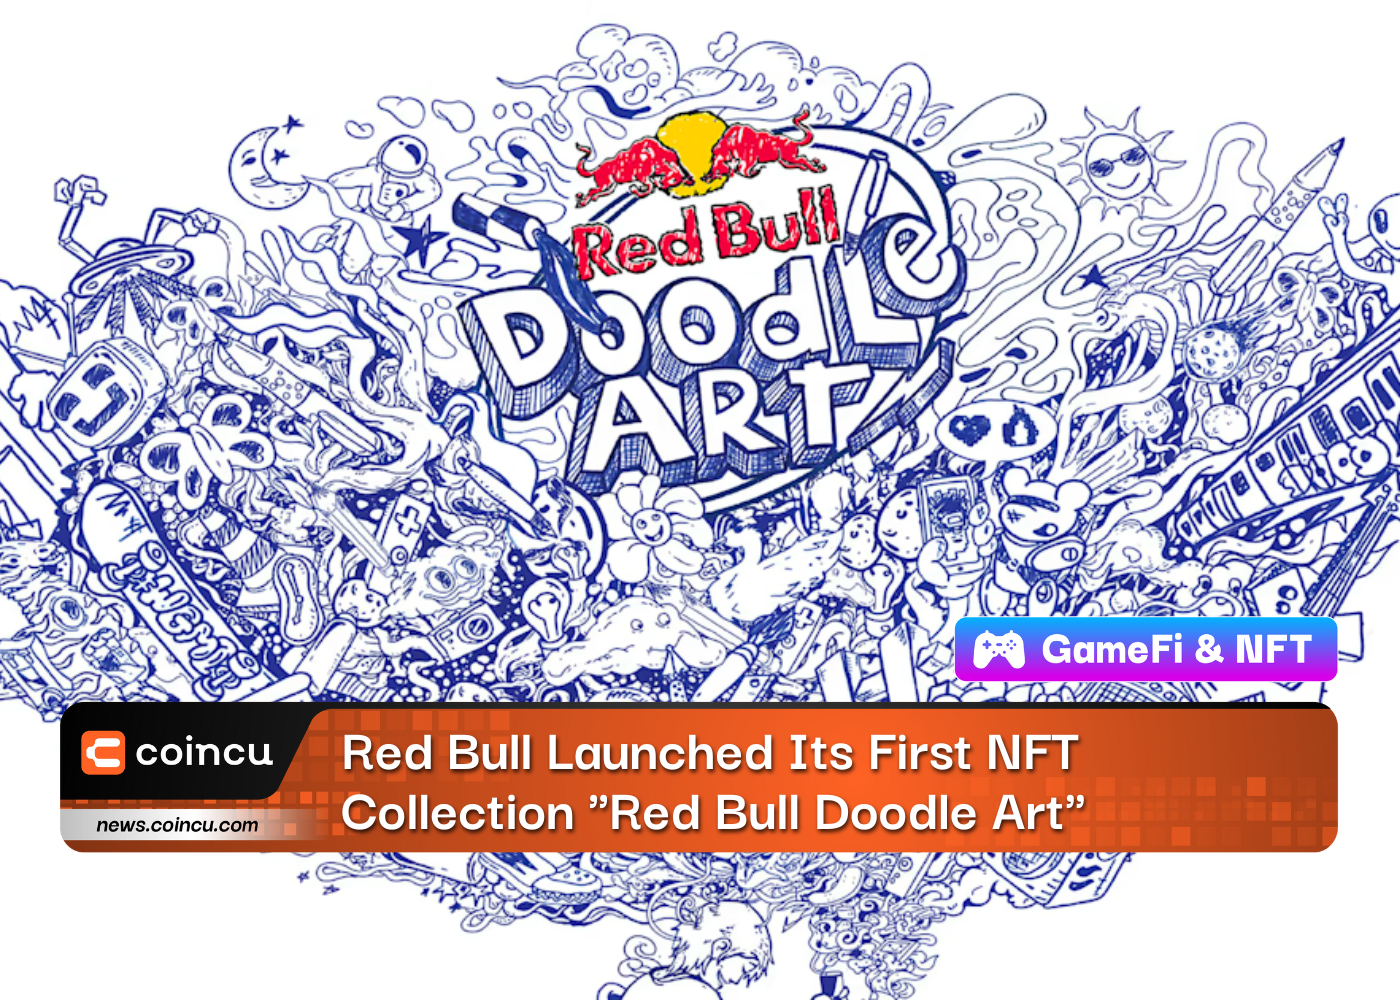 Red Bull Launched Its First NFT Collection "Red Bull Doodle Art"